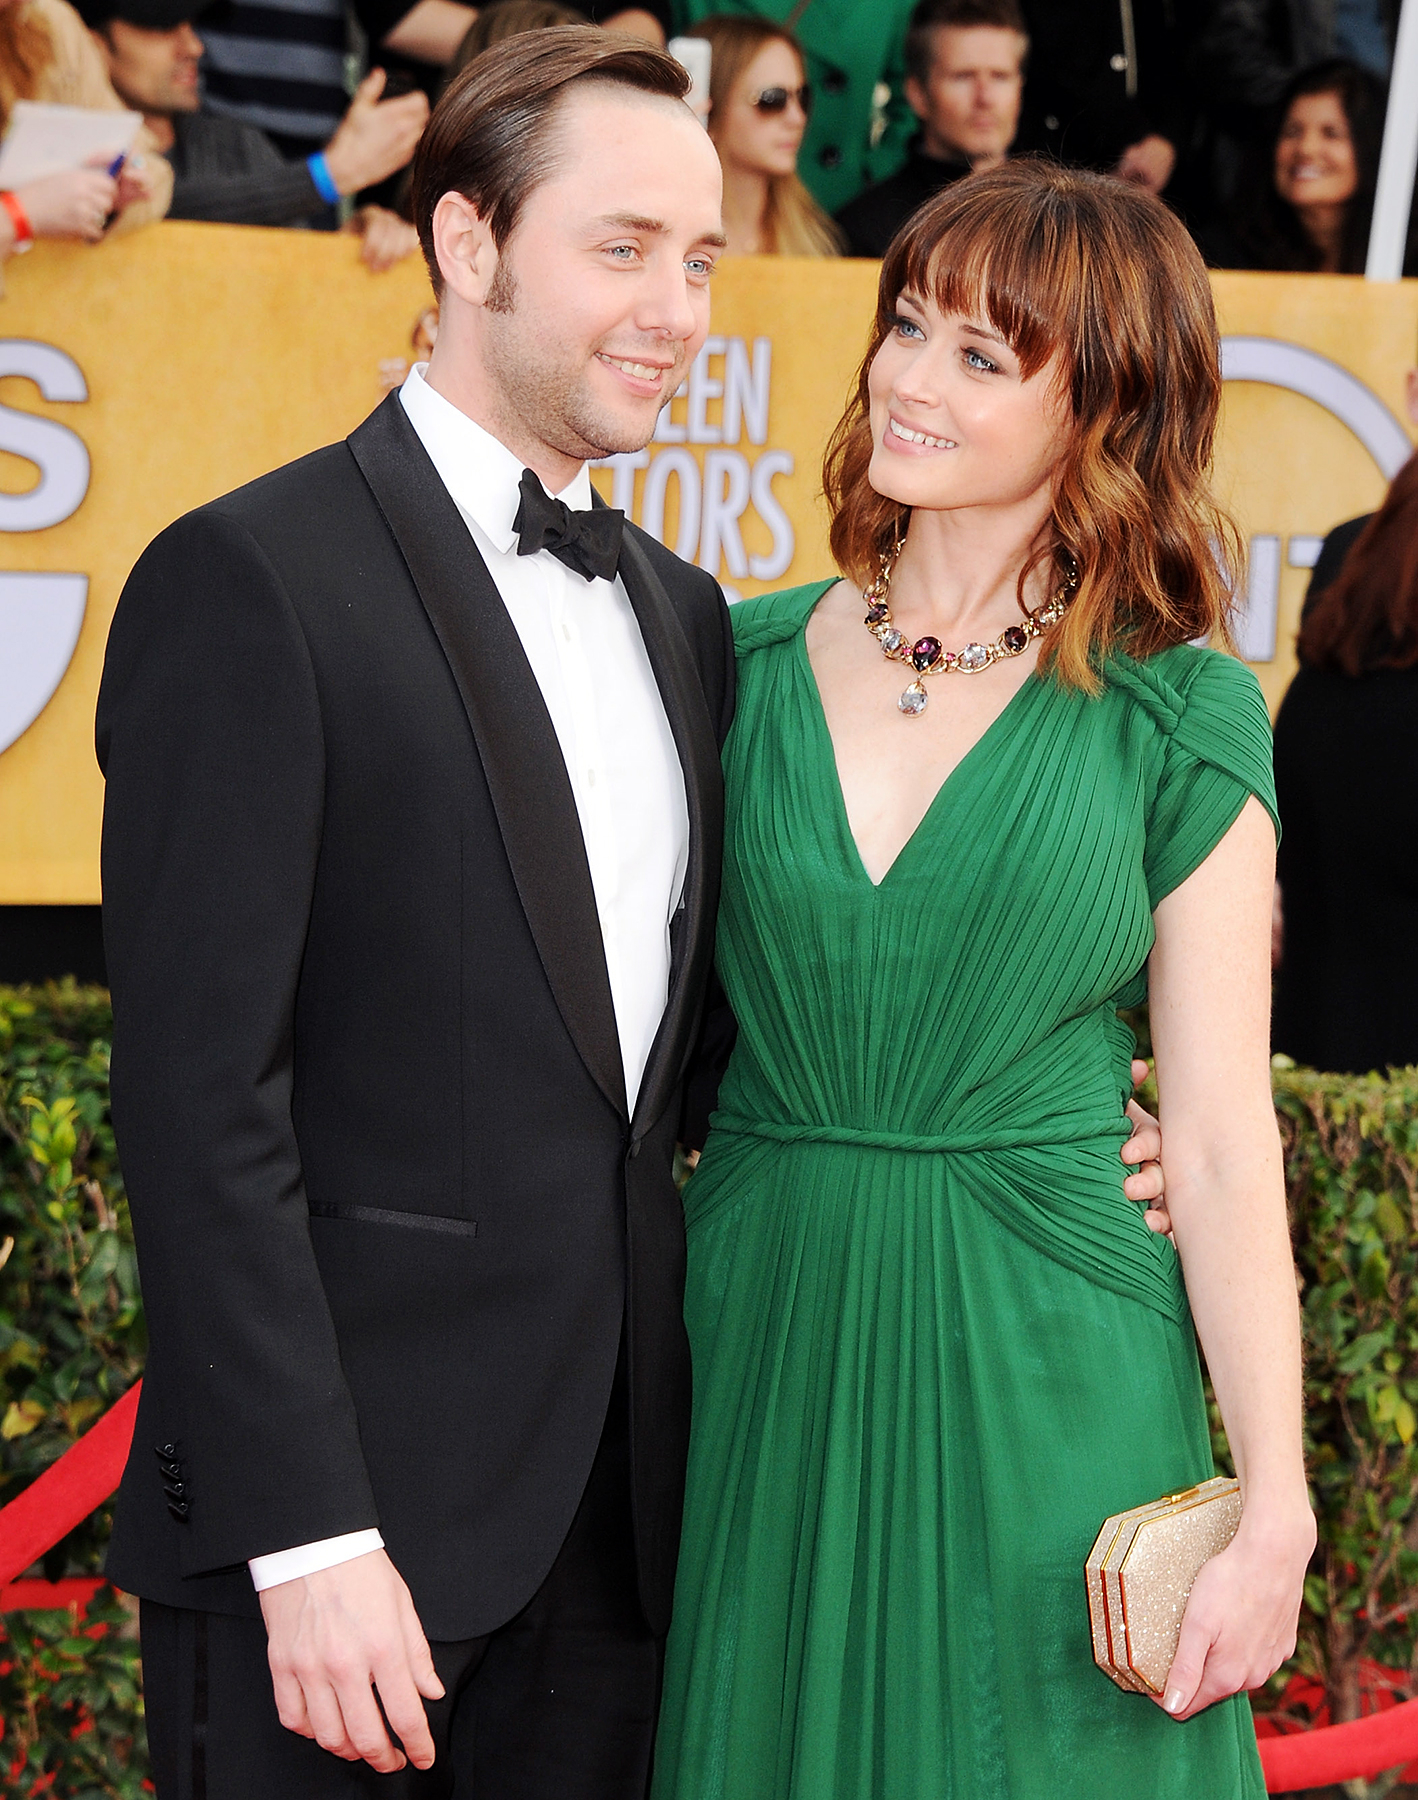 American Actress Alexis Bledel and husband Vincent Kartheiser split after 8 years of marriage